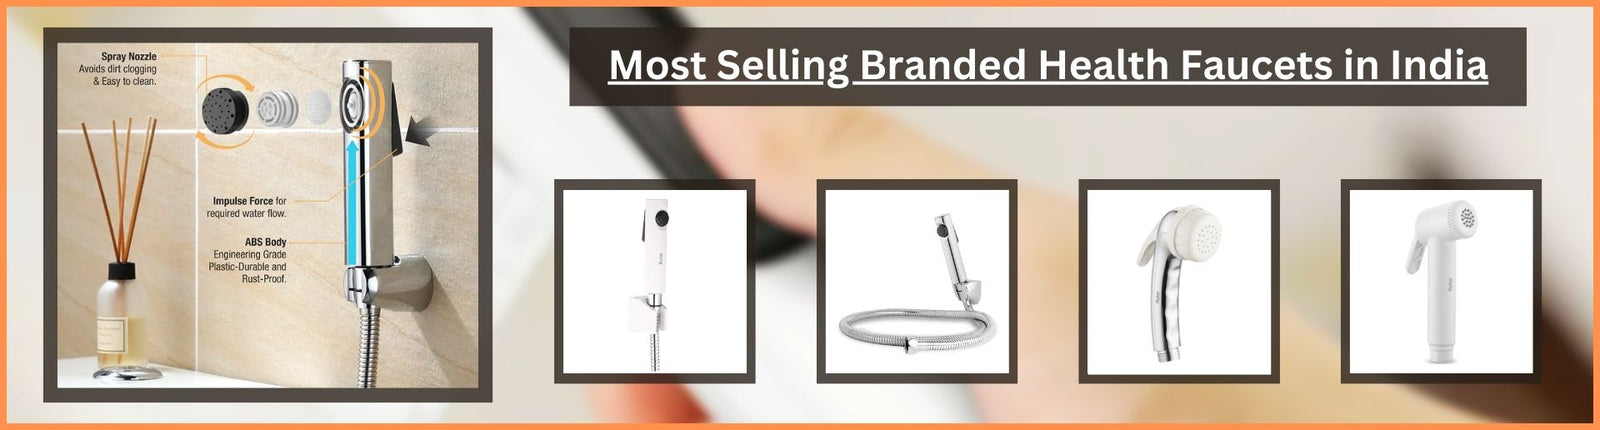 Most Selling Branded Health Faucets in India